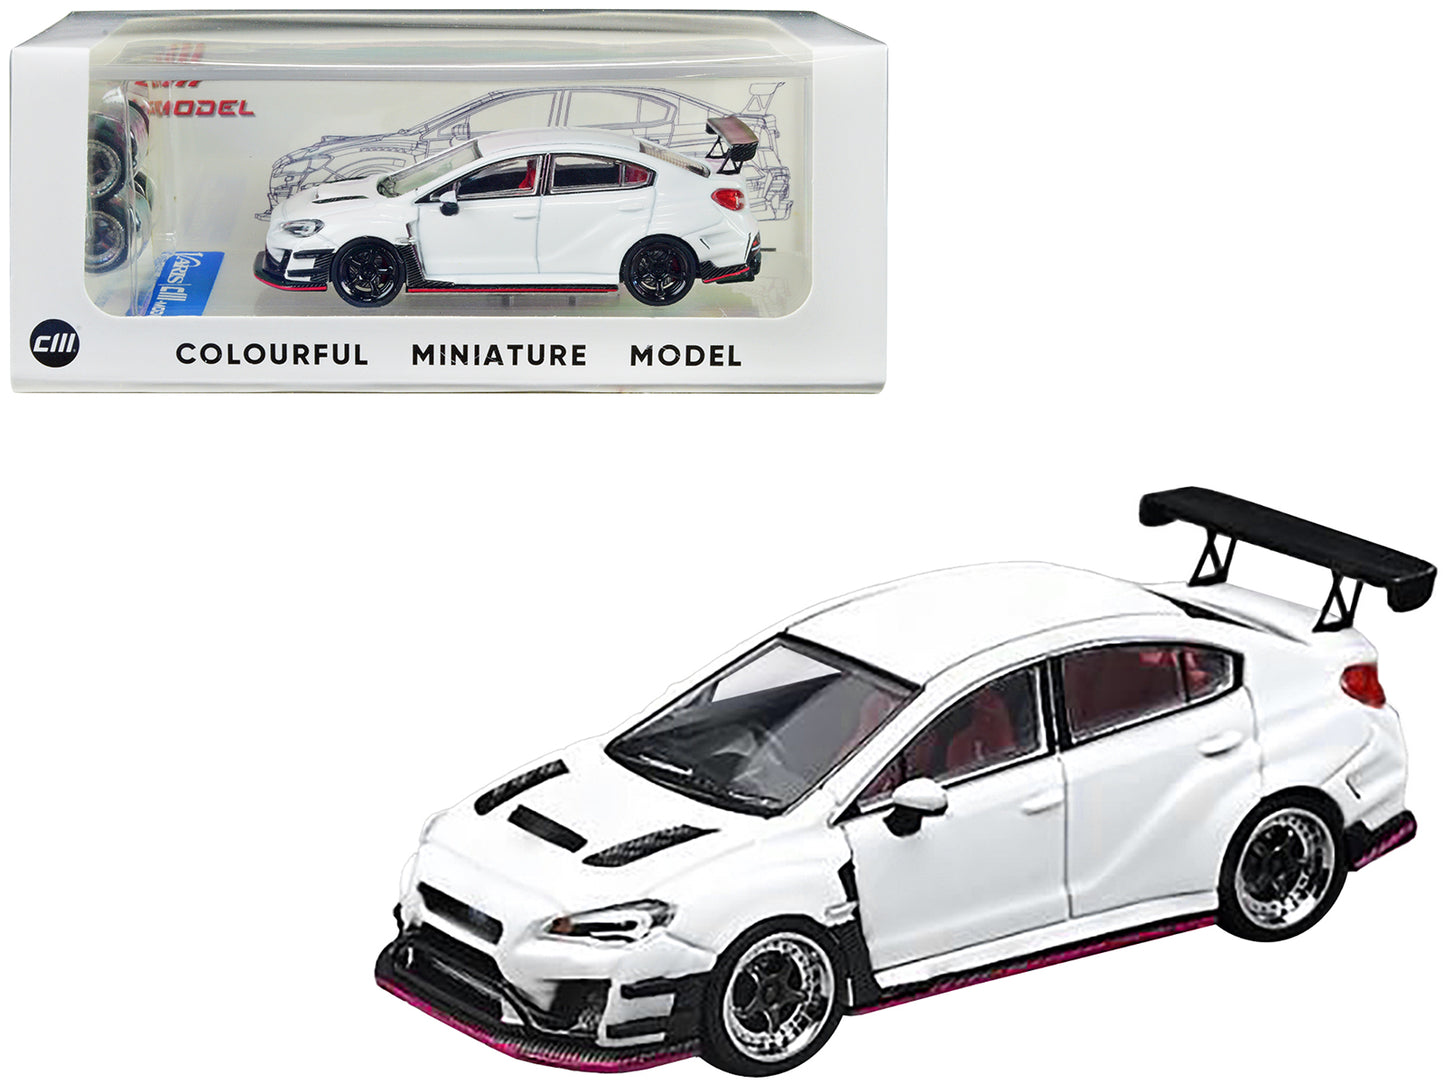 Subaru VAB WRX STI with S4 Wide Body Kit RHD (Right Hand Drive) White with Extra Wheels 1/64 Diecast Model Car by CM Models